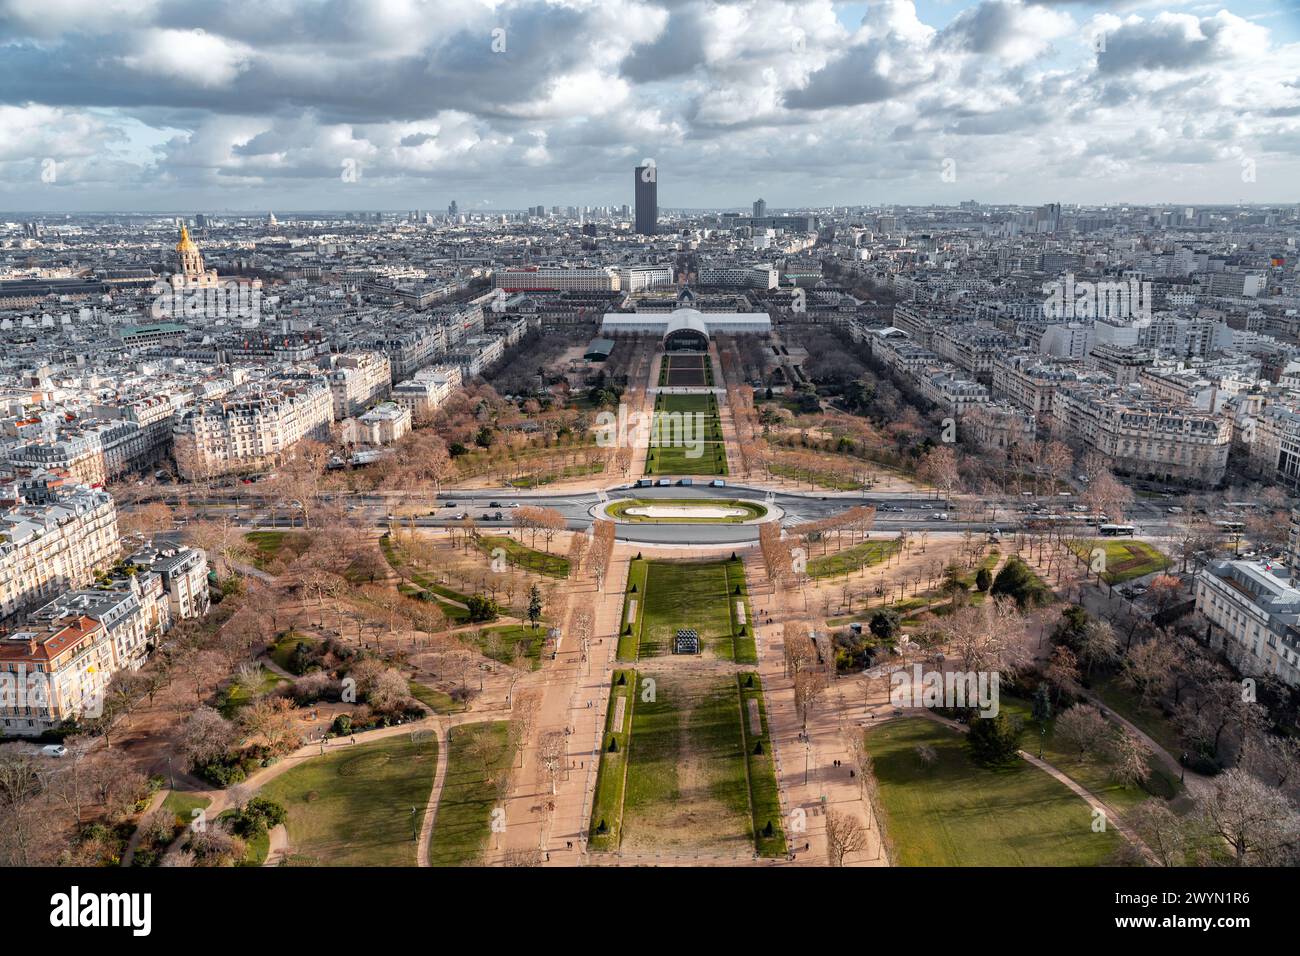 Paris, France - January 20 2022: Aerial view of Paris, the French capital from the top of the Eiffel Tower. Stock Photo